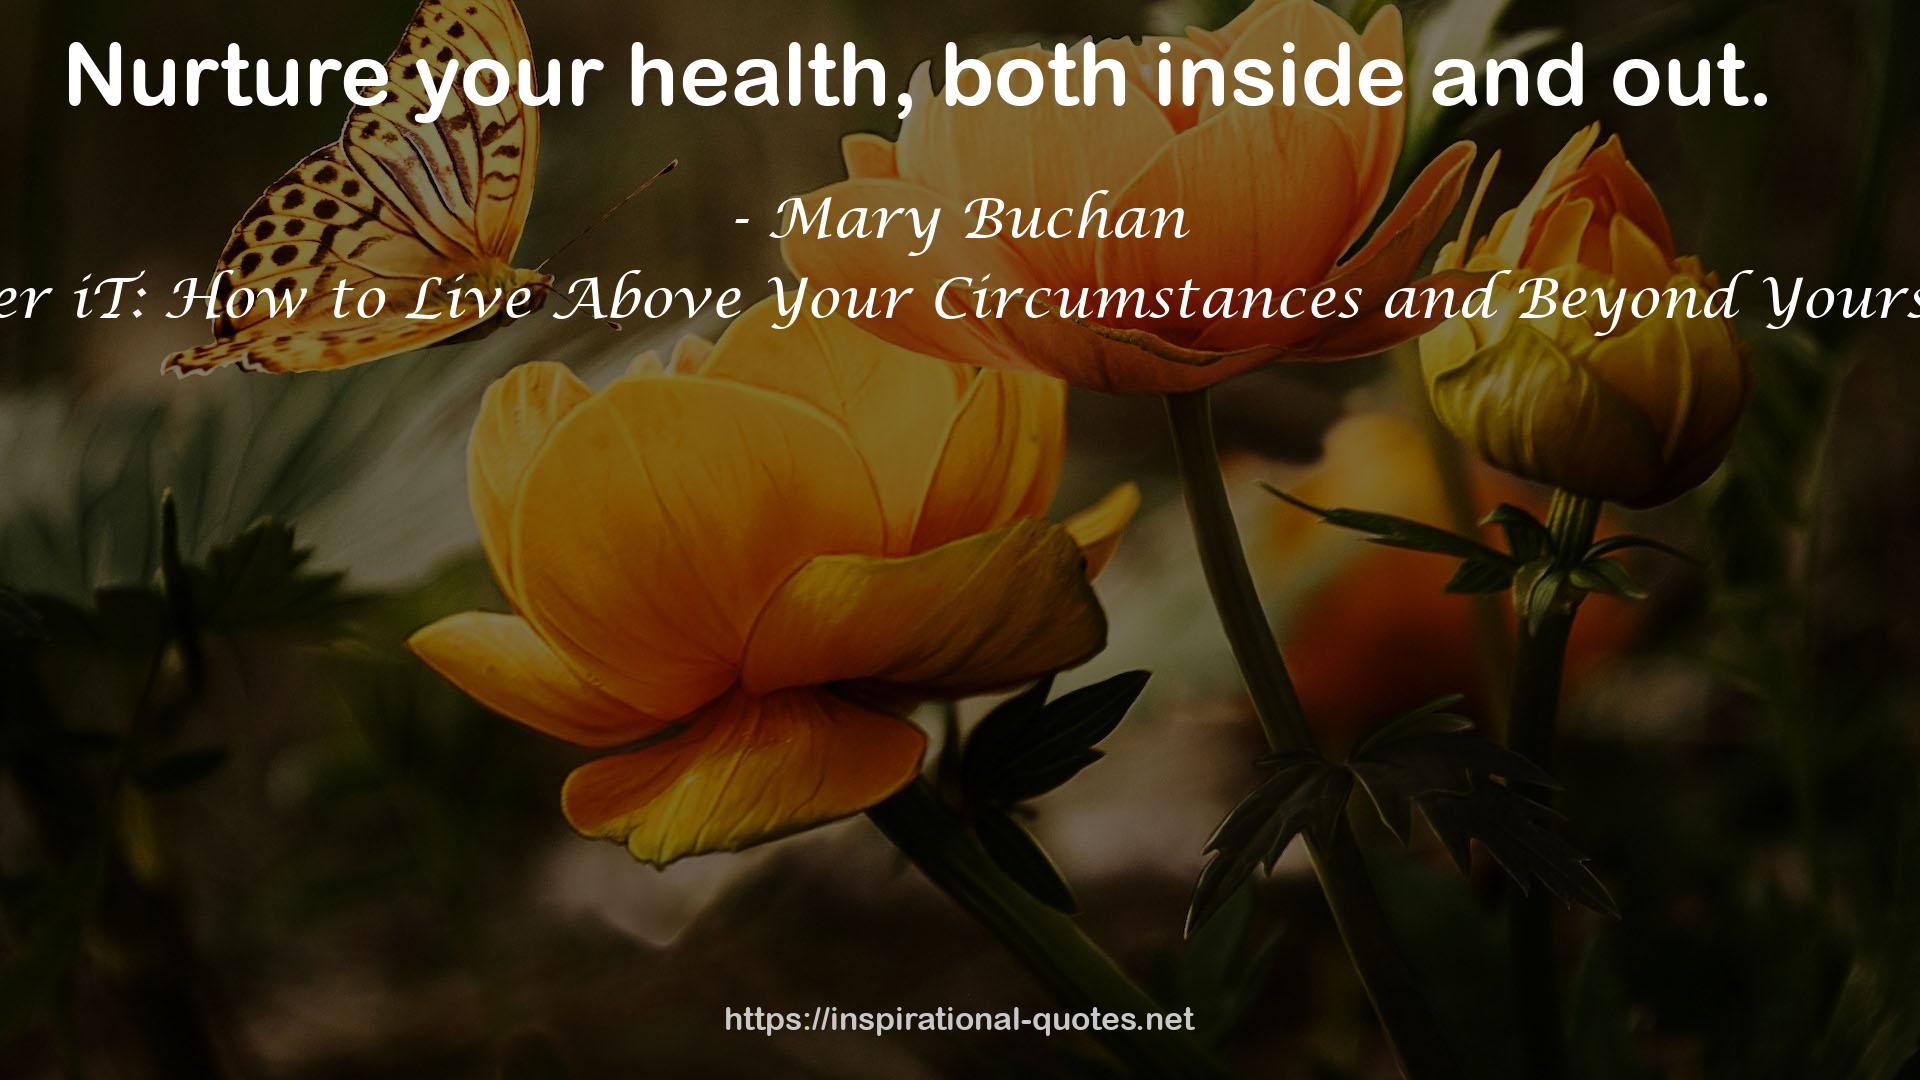 Mary Buchan QUOTES